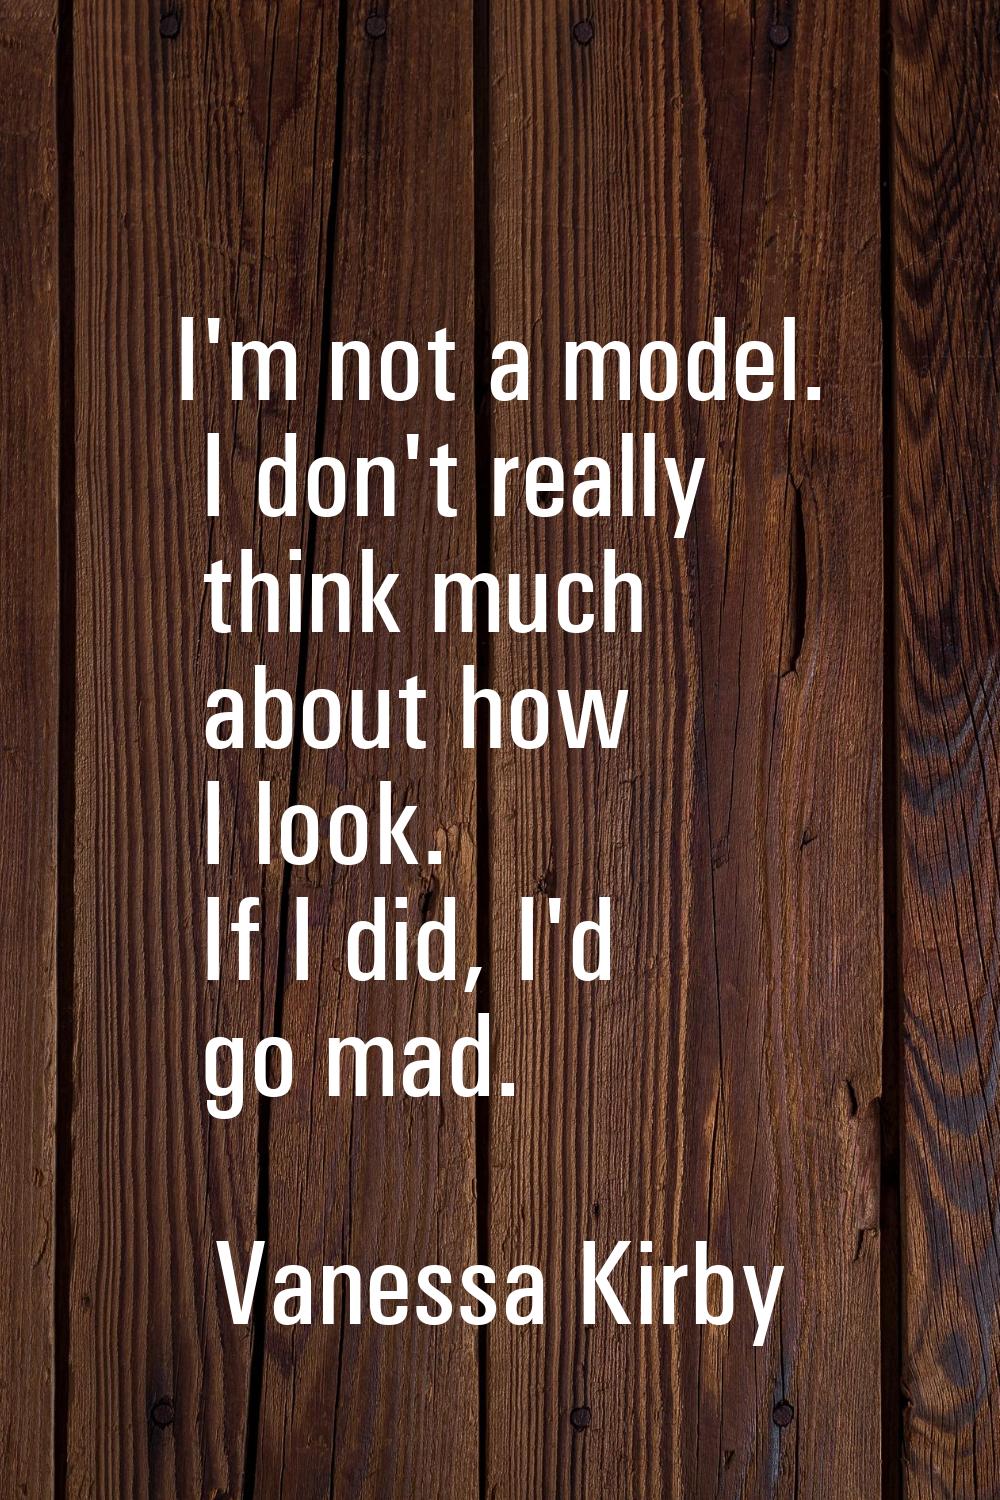 I'm not a model. I don't really think much about how I look. If I did, I'd go mad.